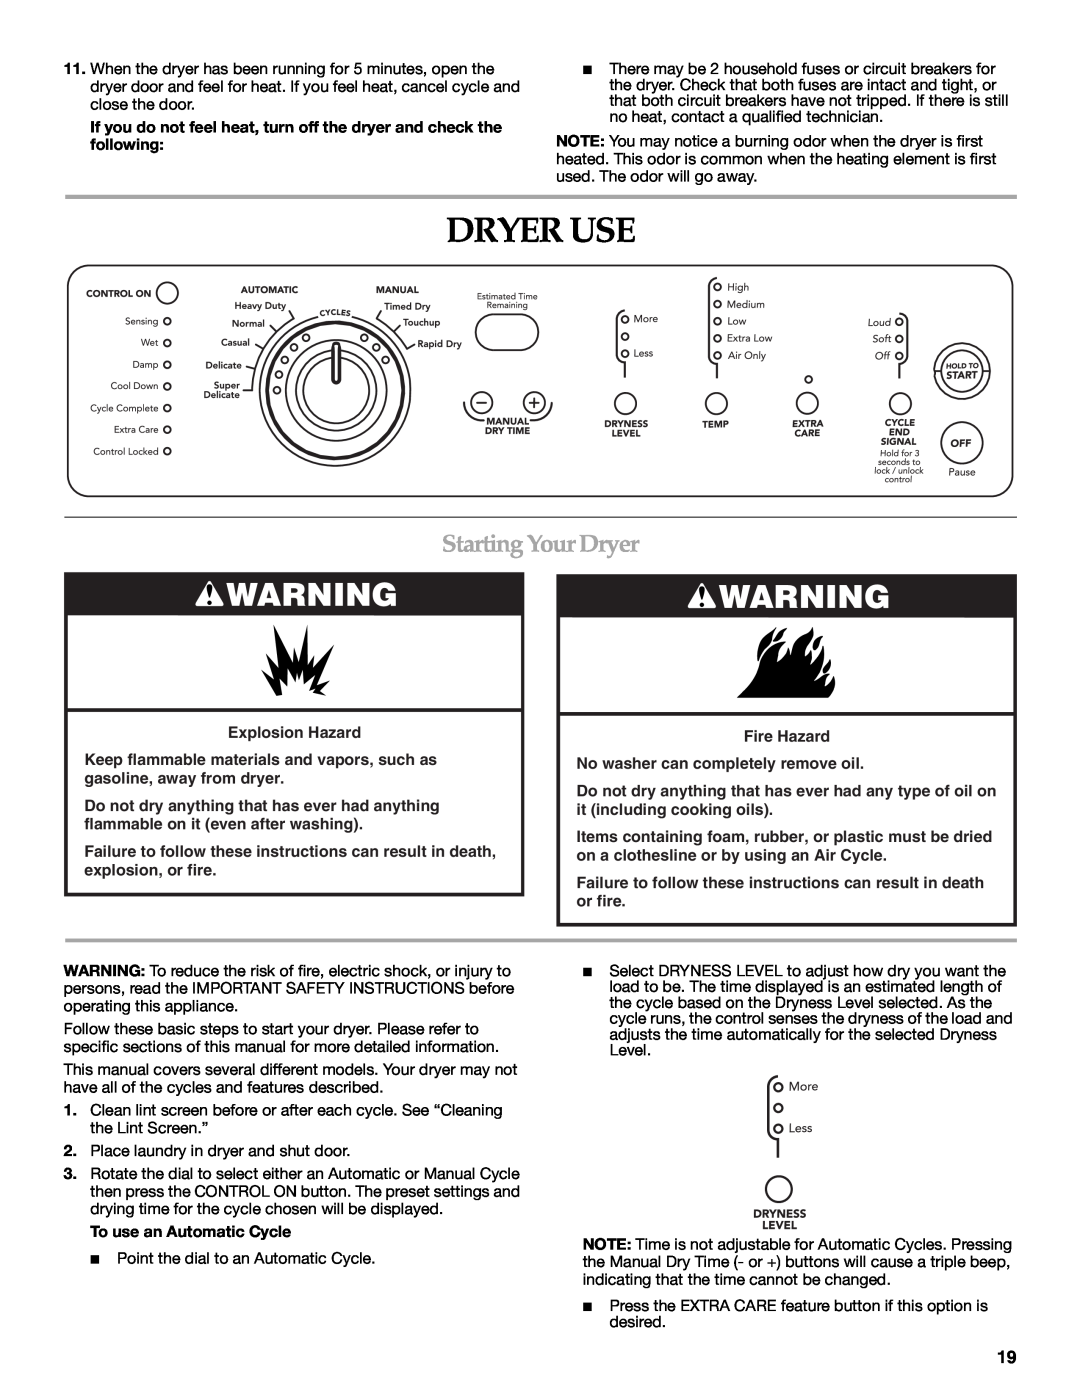 Maytag W10099070 manual Dryer Use, Starting Your Dryer, If you do not feel heat, turn off the dryer and check the following 